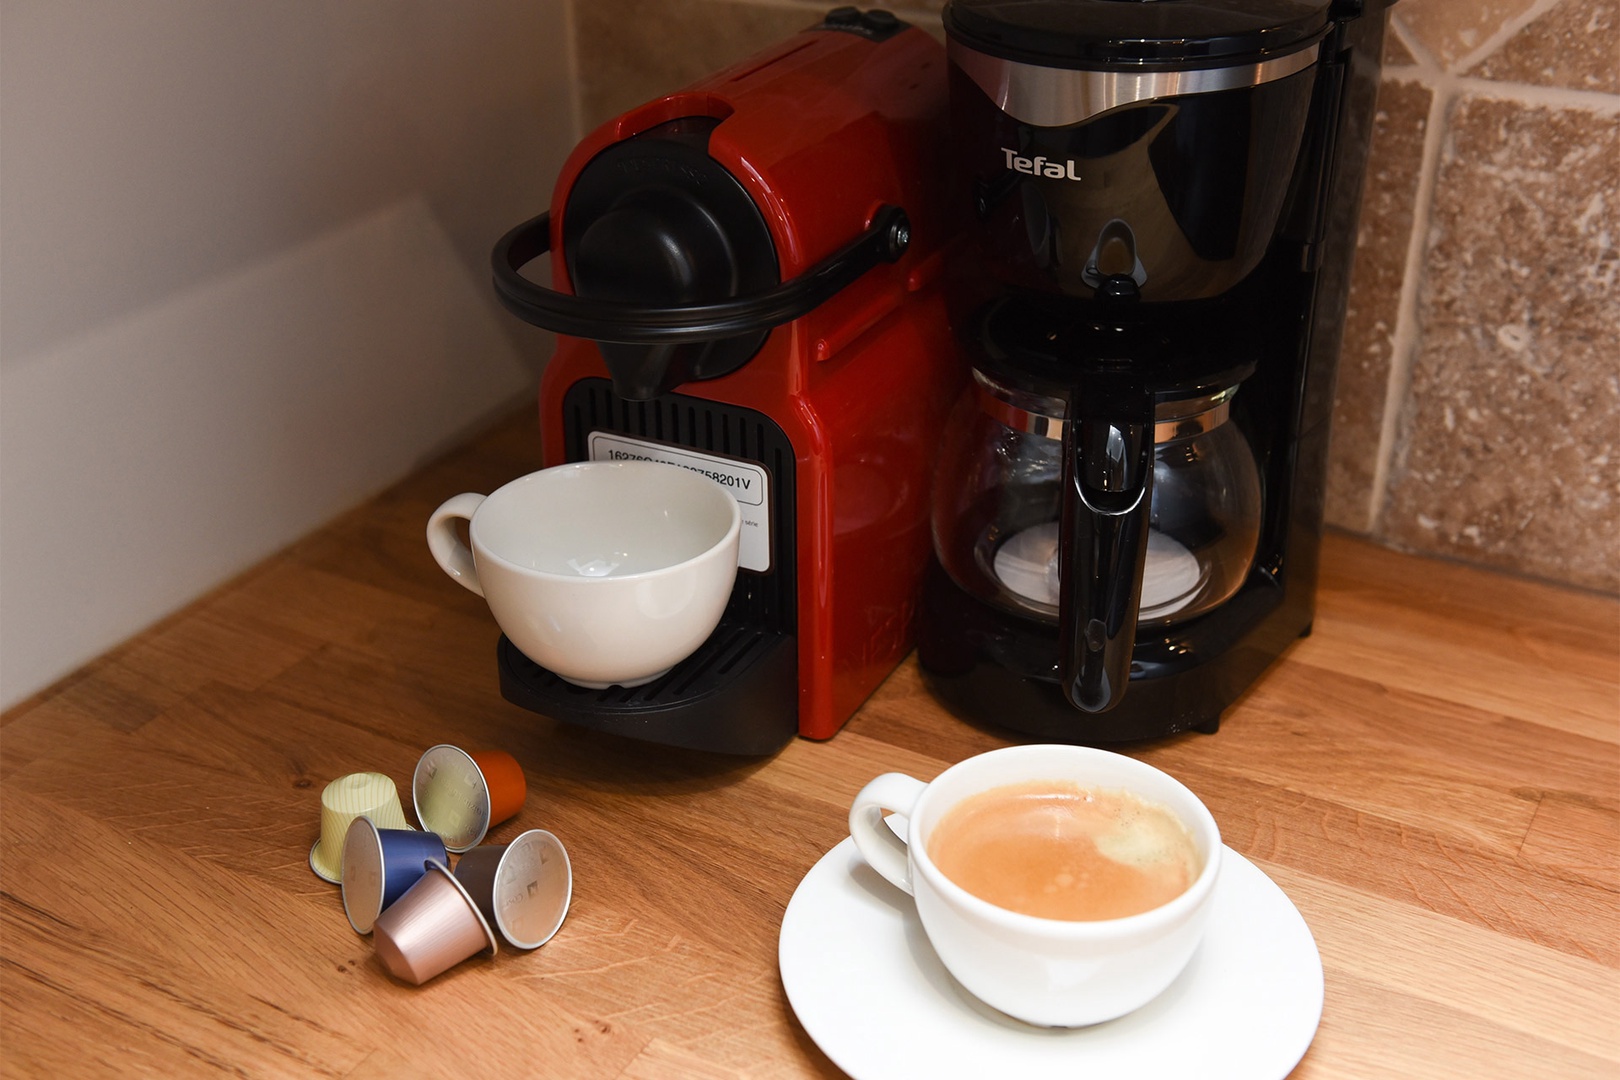 The kitchen is stocked with a Nespresso maker and capsules.